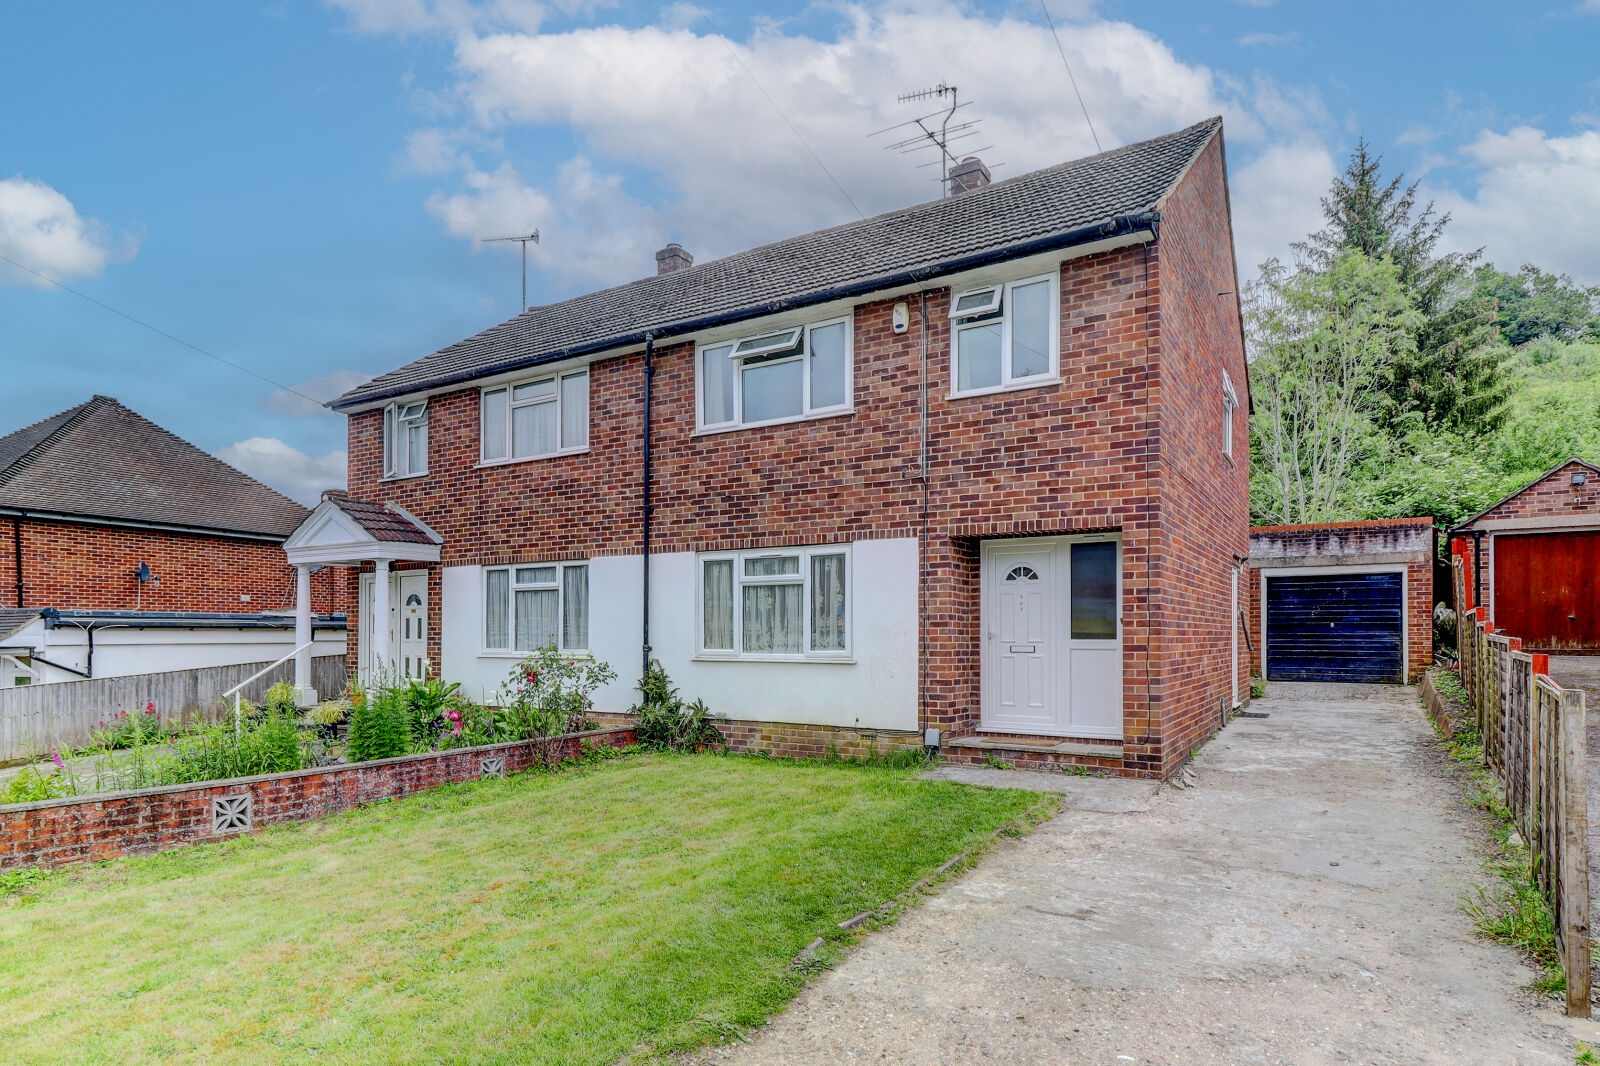 3 bedroom semi detached house for sale Desborough Avenue, High Wycombe, HP11, main image